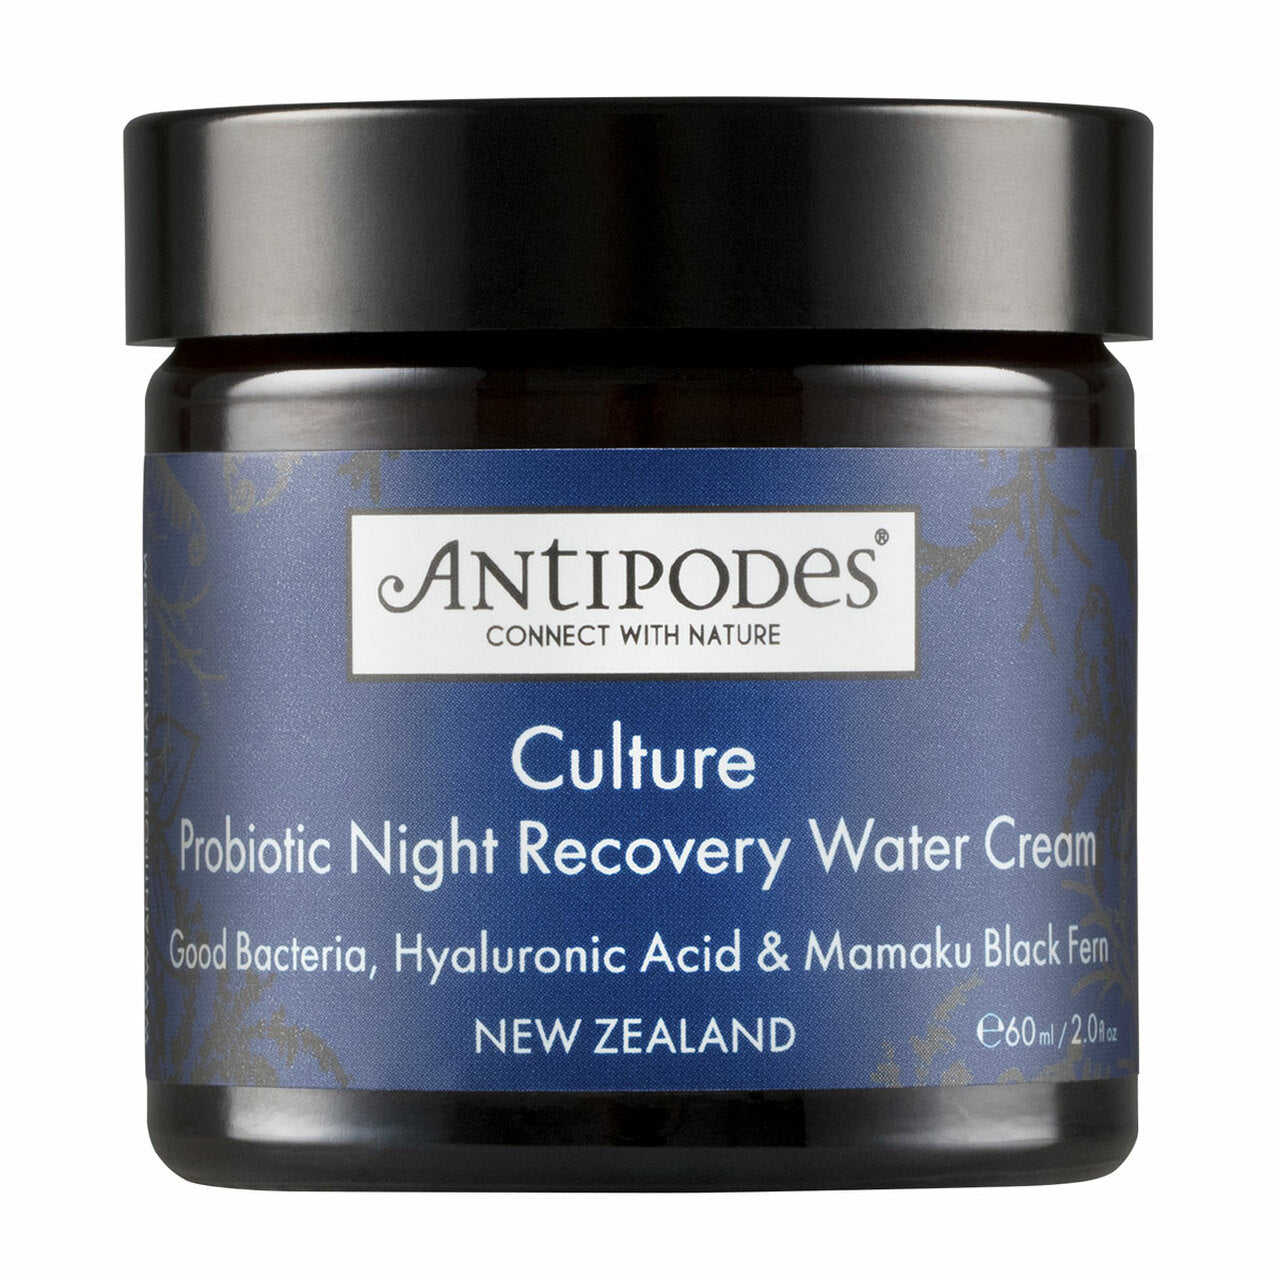 Antipodes Culture Probiotic Night Recovery Water Cream 60ml.